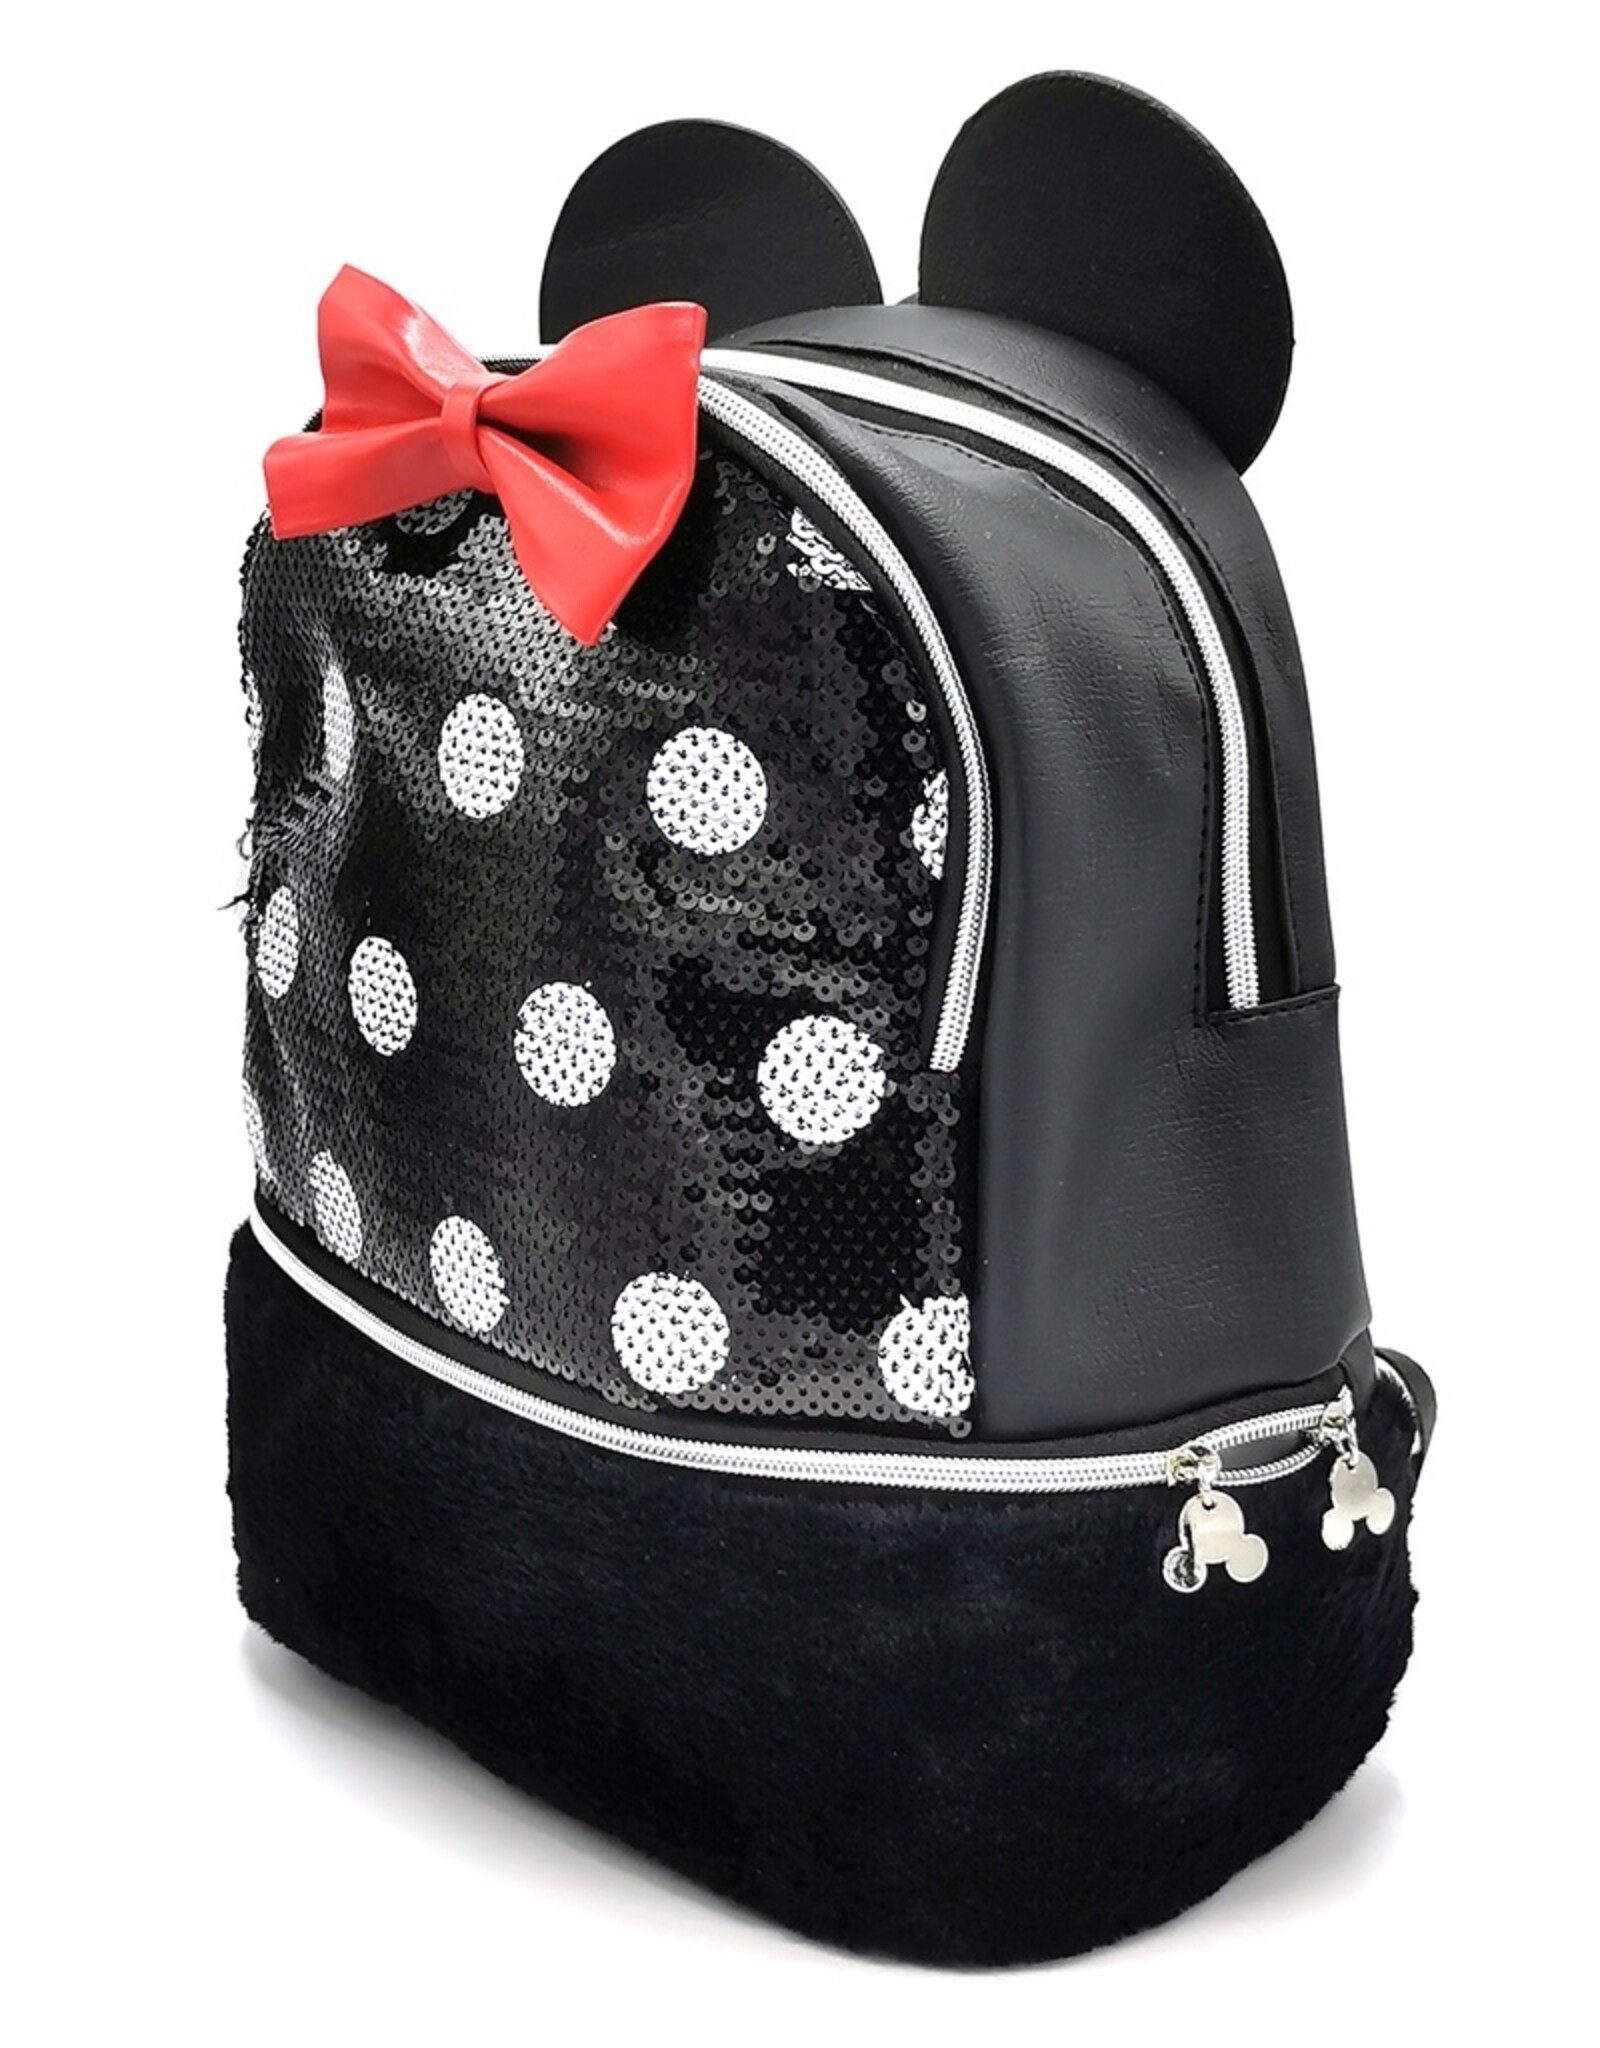 Karactermania Disney bags - Disney Minnie Mouse backpack with sequins